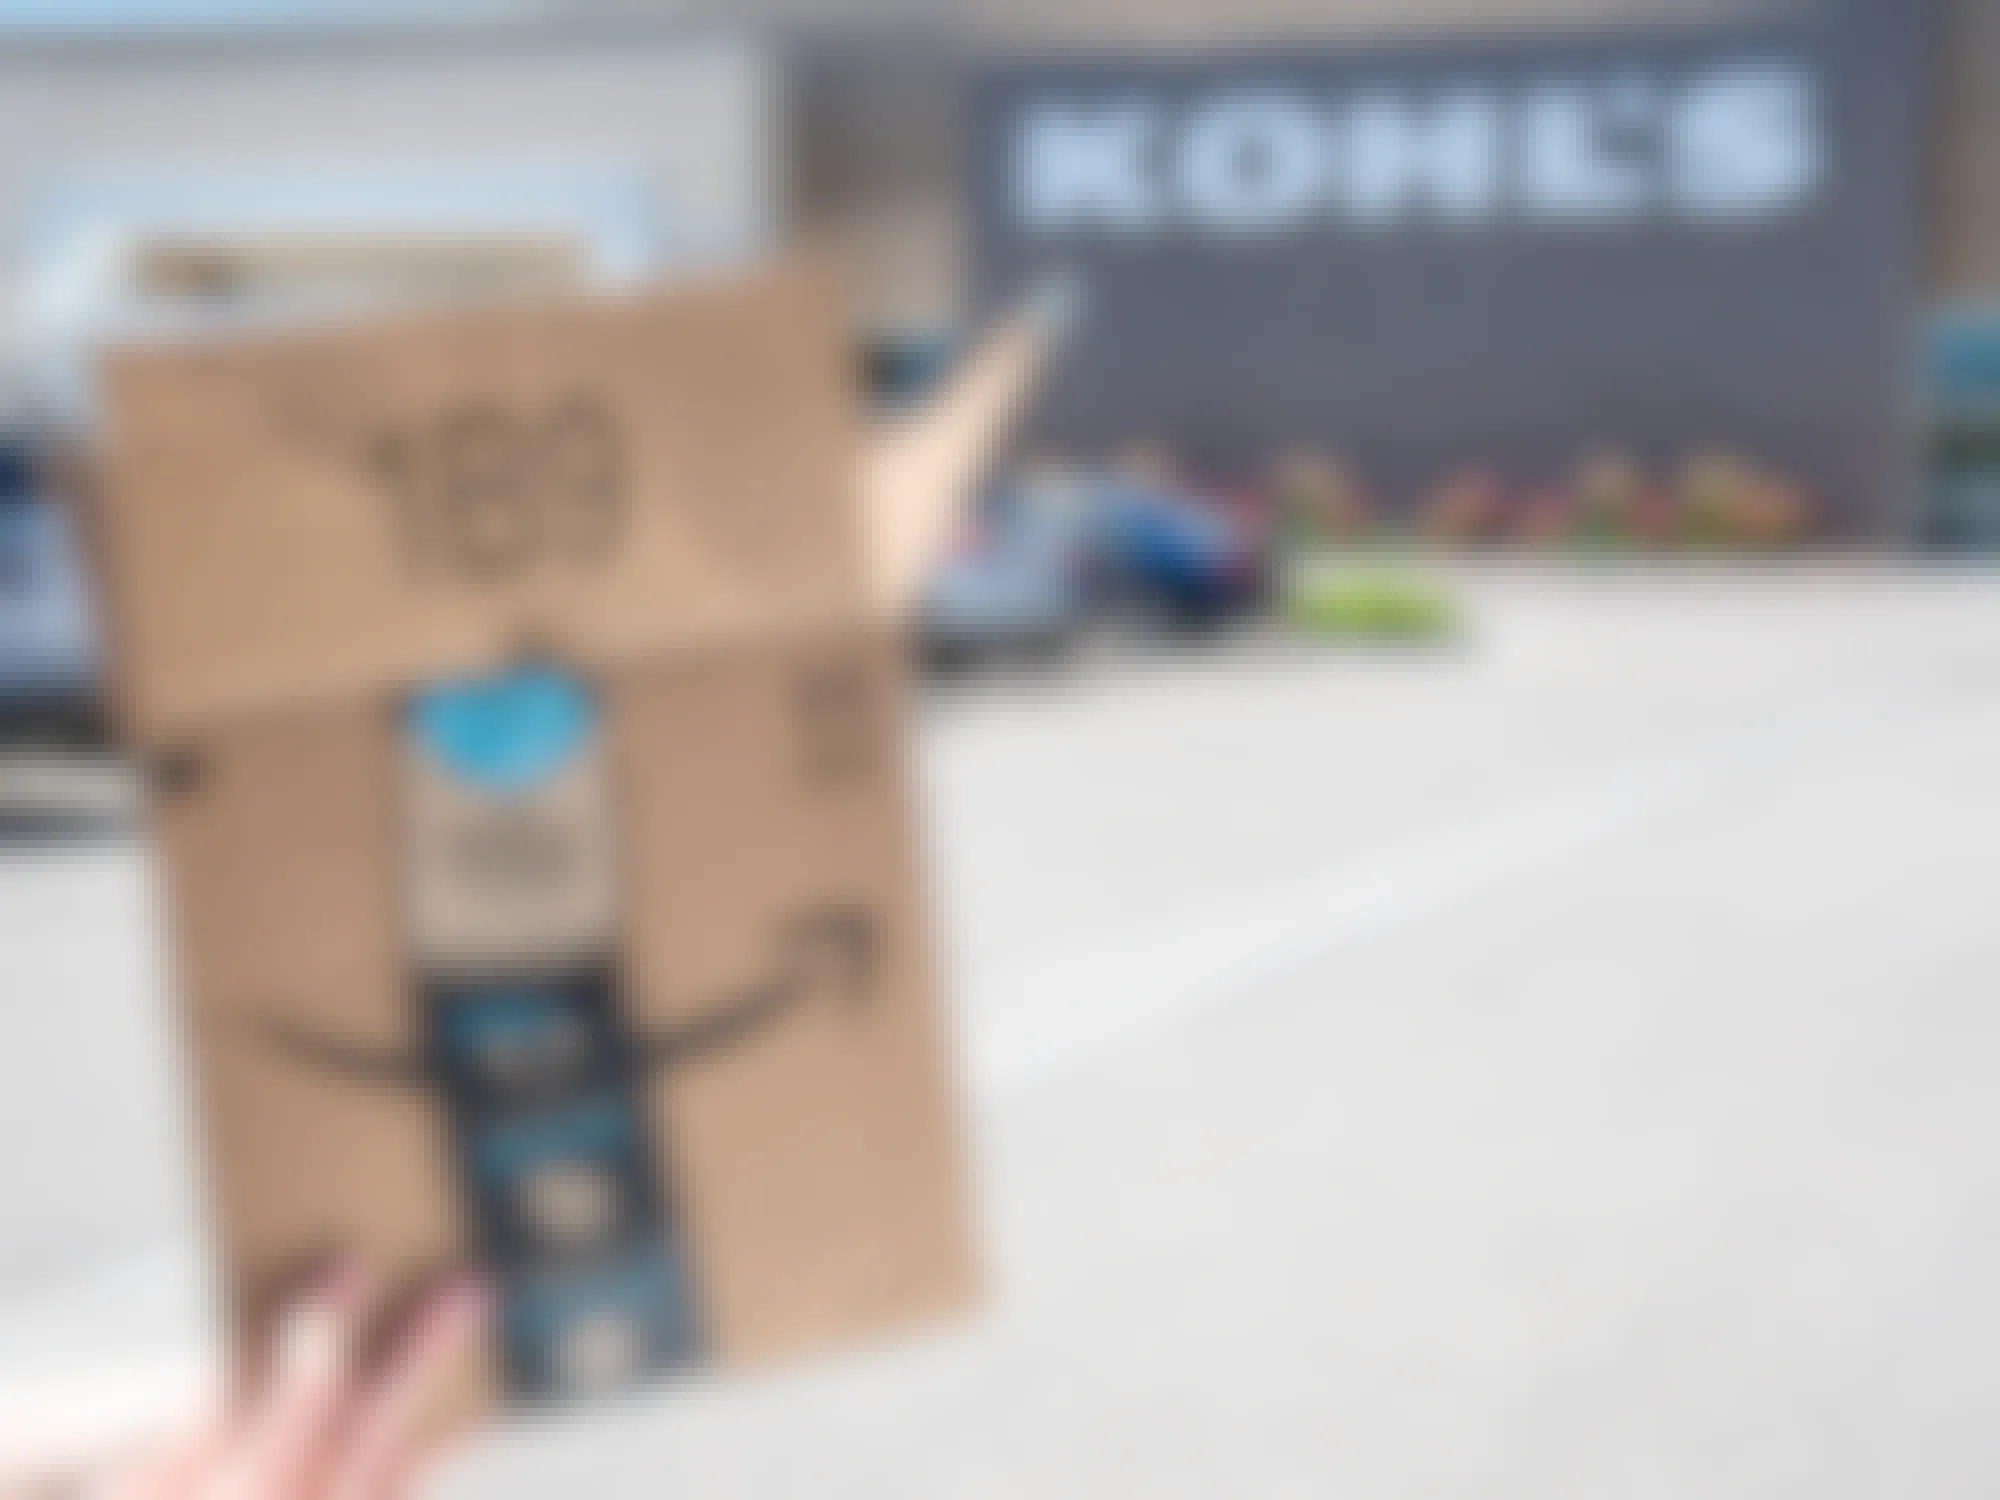 A person holding an open Amazon box in front of Kohl's